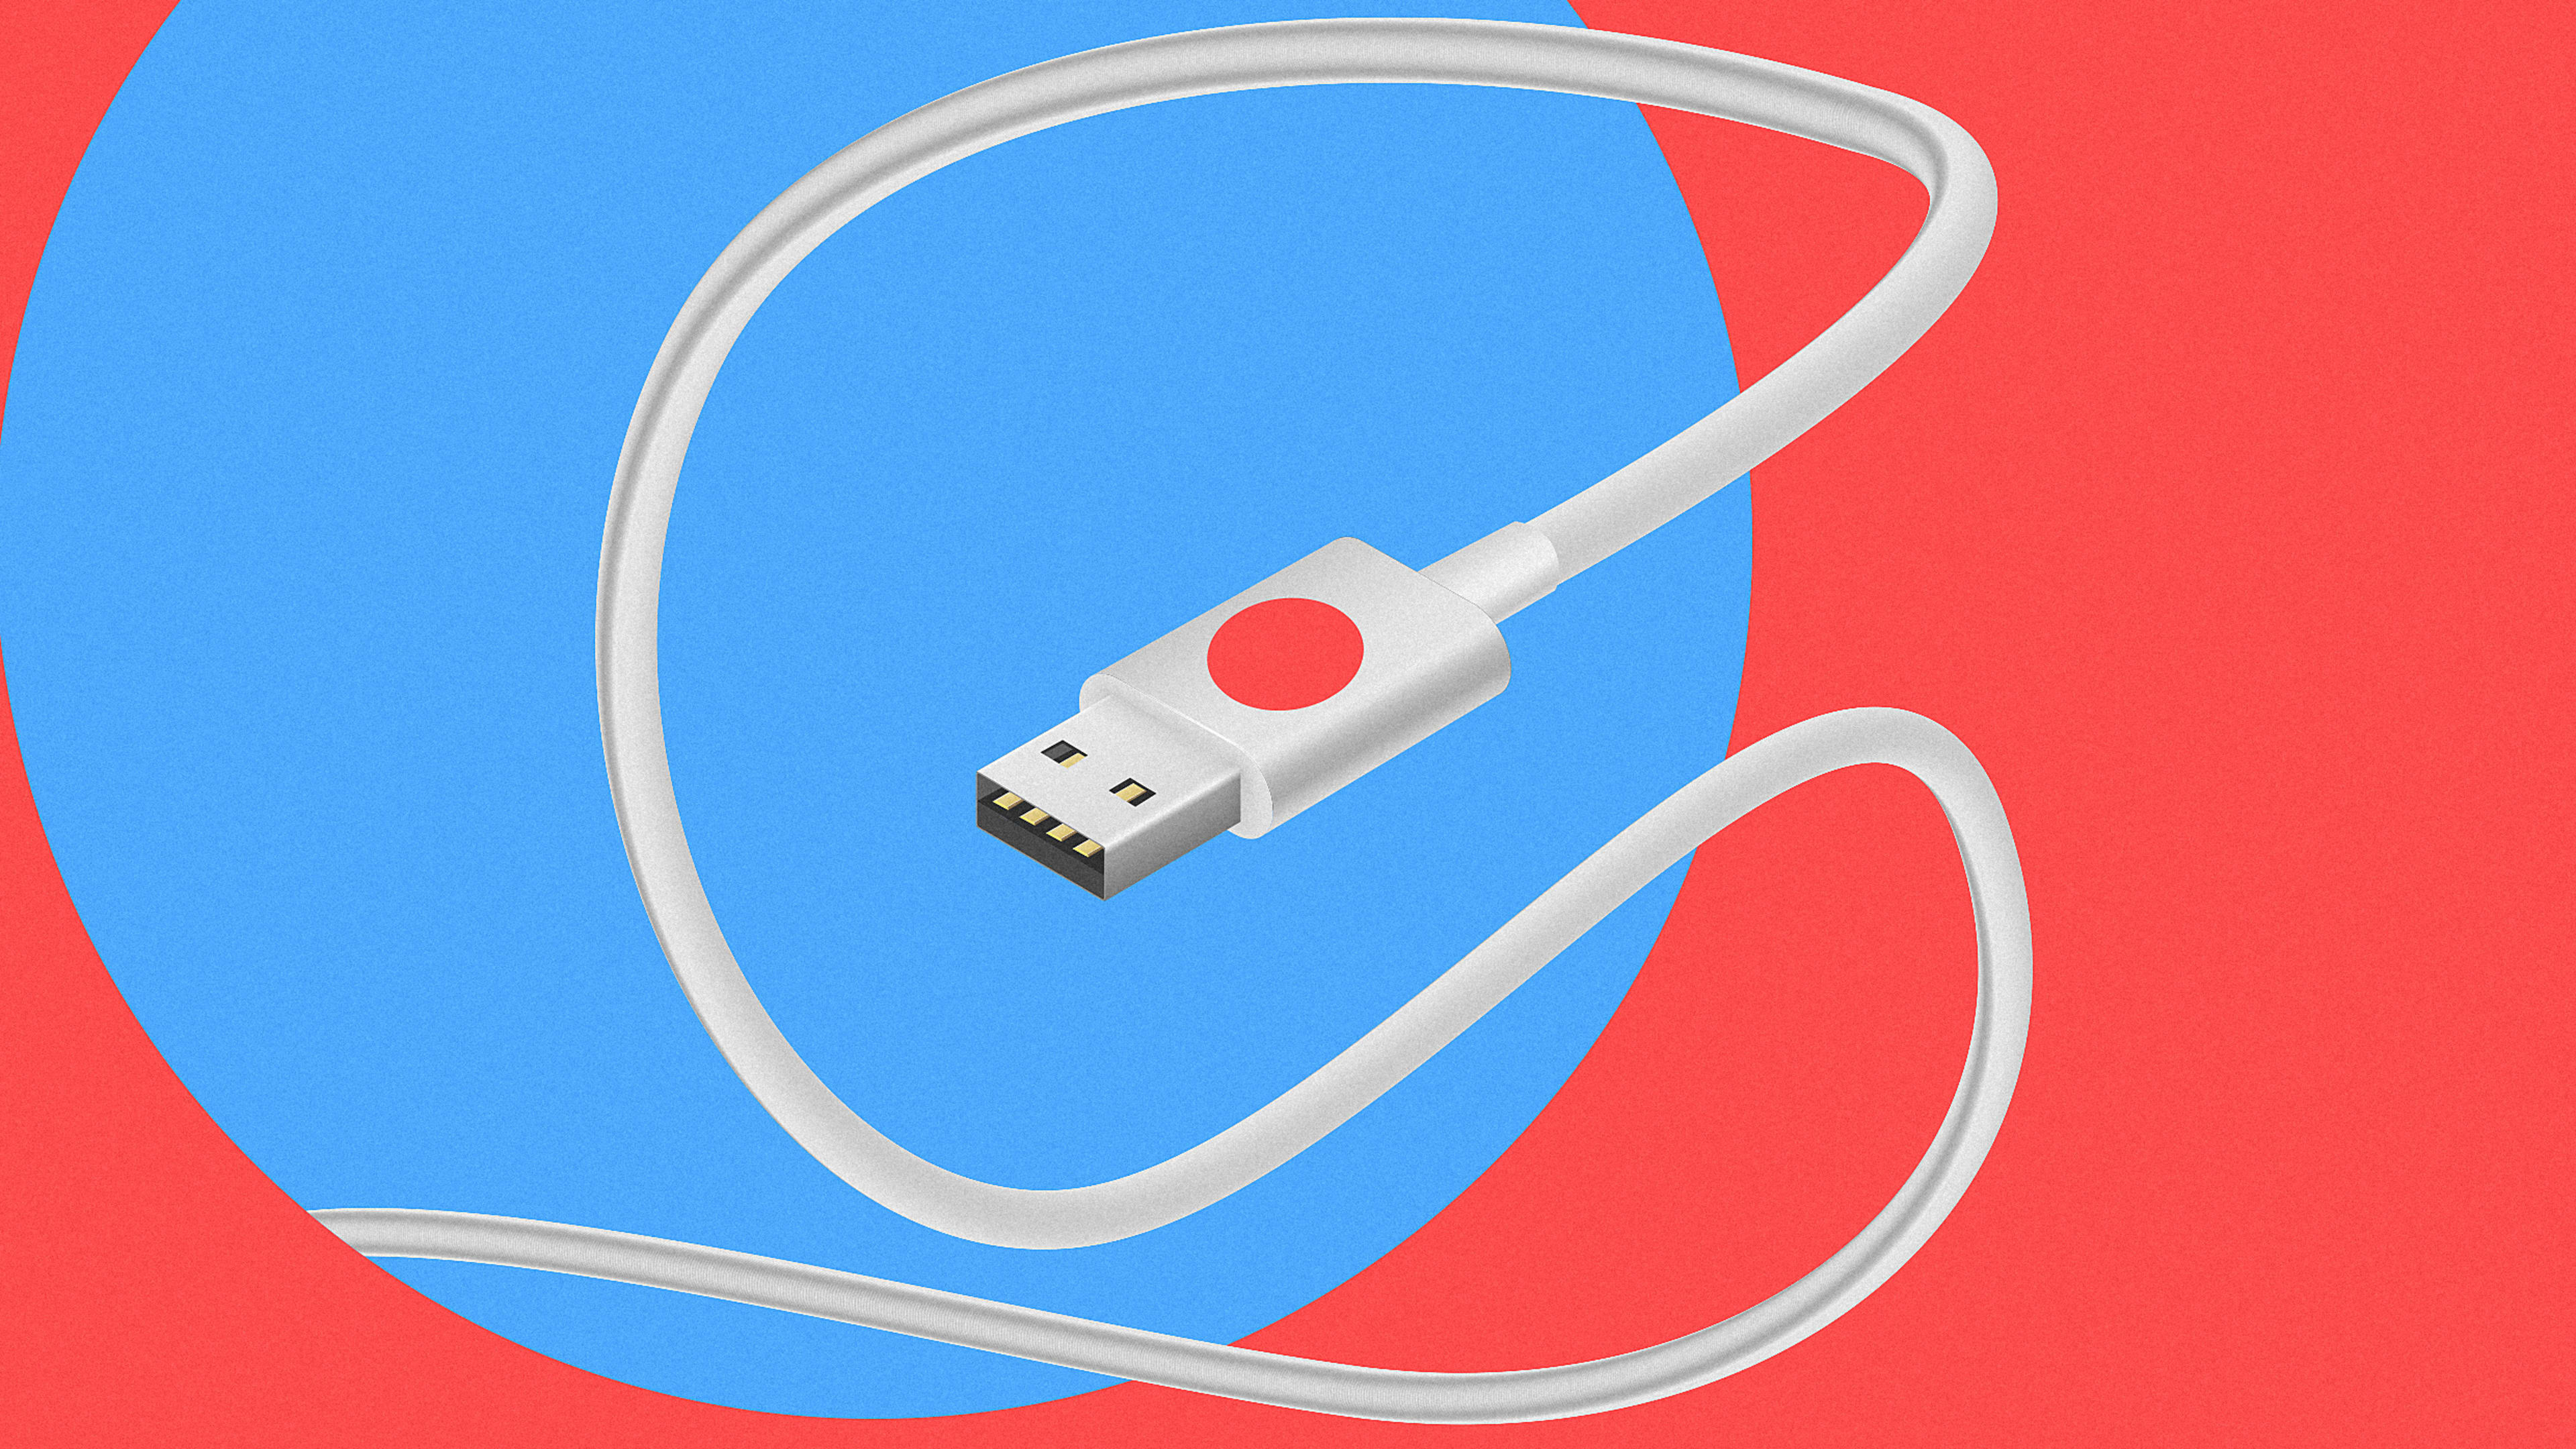 The stupidly simple idea that would fix USB’s biggest design flaw